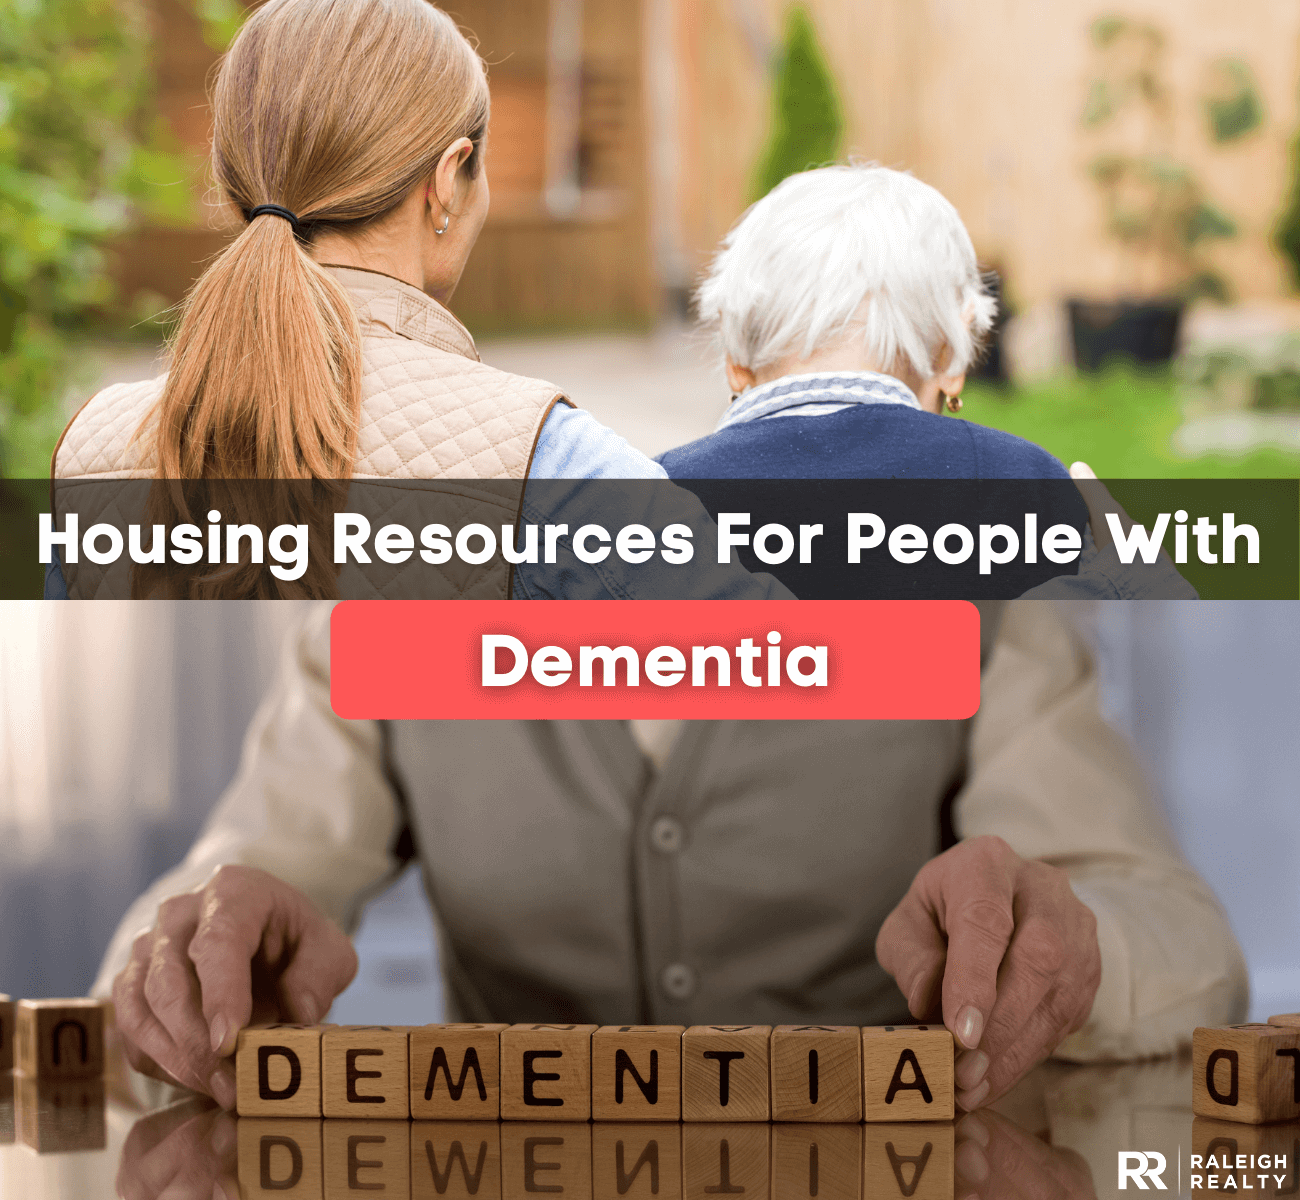 An elderly mother and her daughter who are walking together - housing resources for people who have dementia